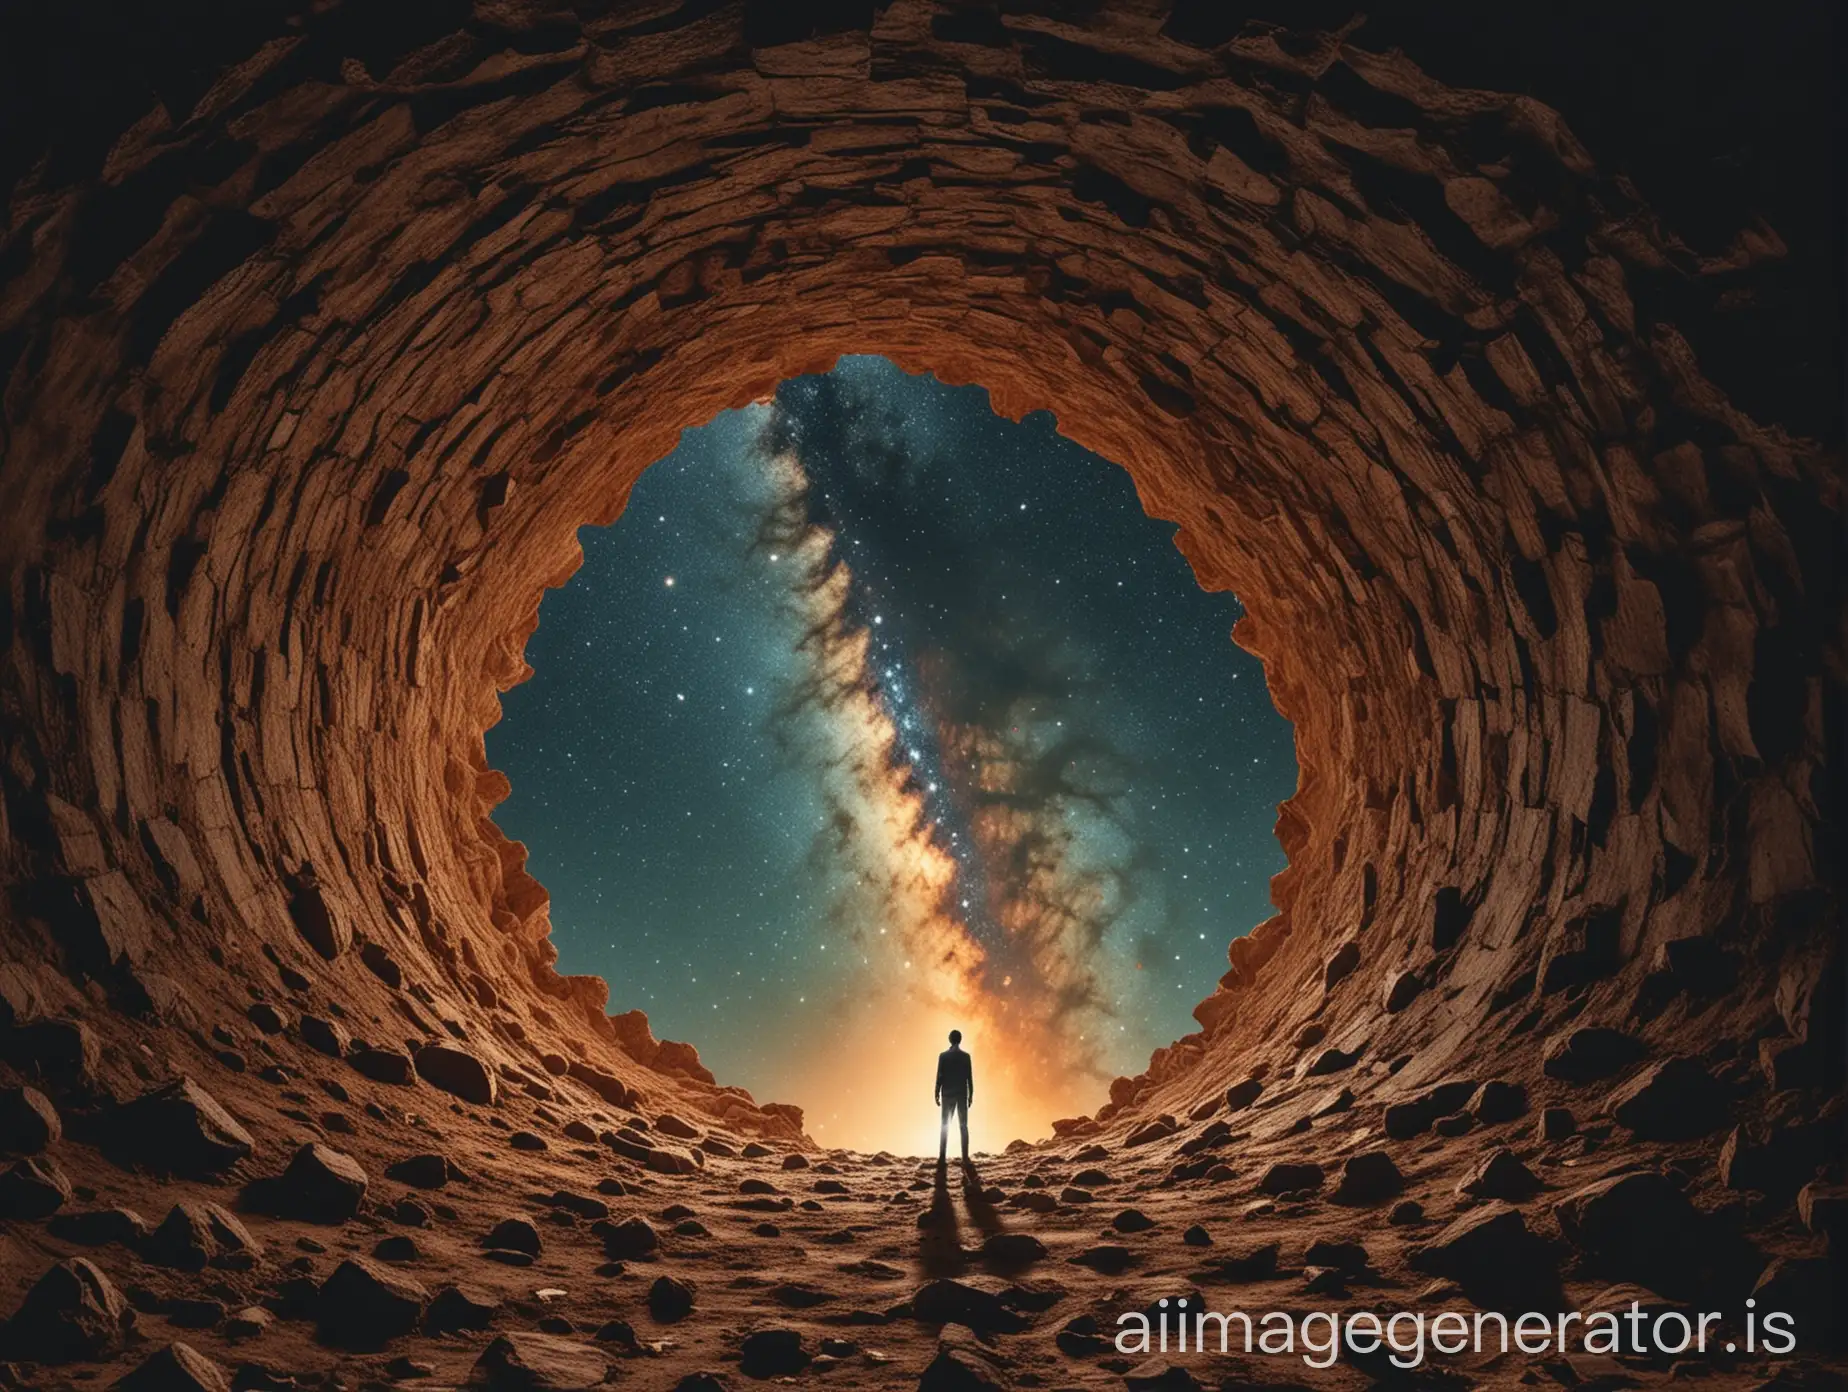 Create an image of a person standing on flat ground, gazing upwards towards the sky, where a large hole is patched with a single stone, emitting a mesmerizing glow